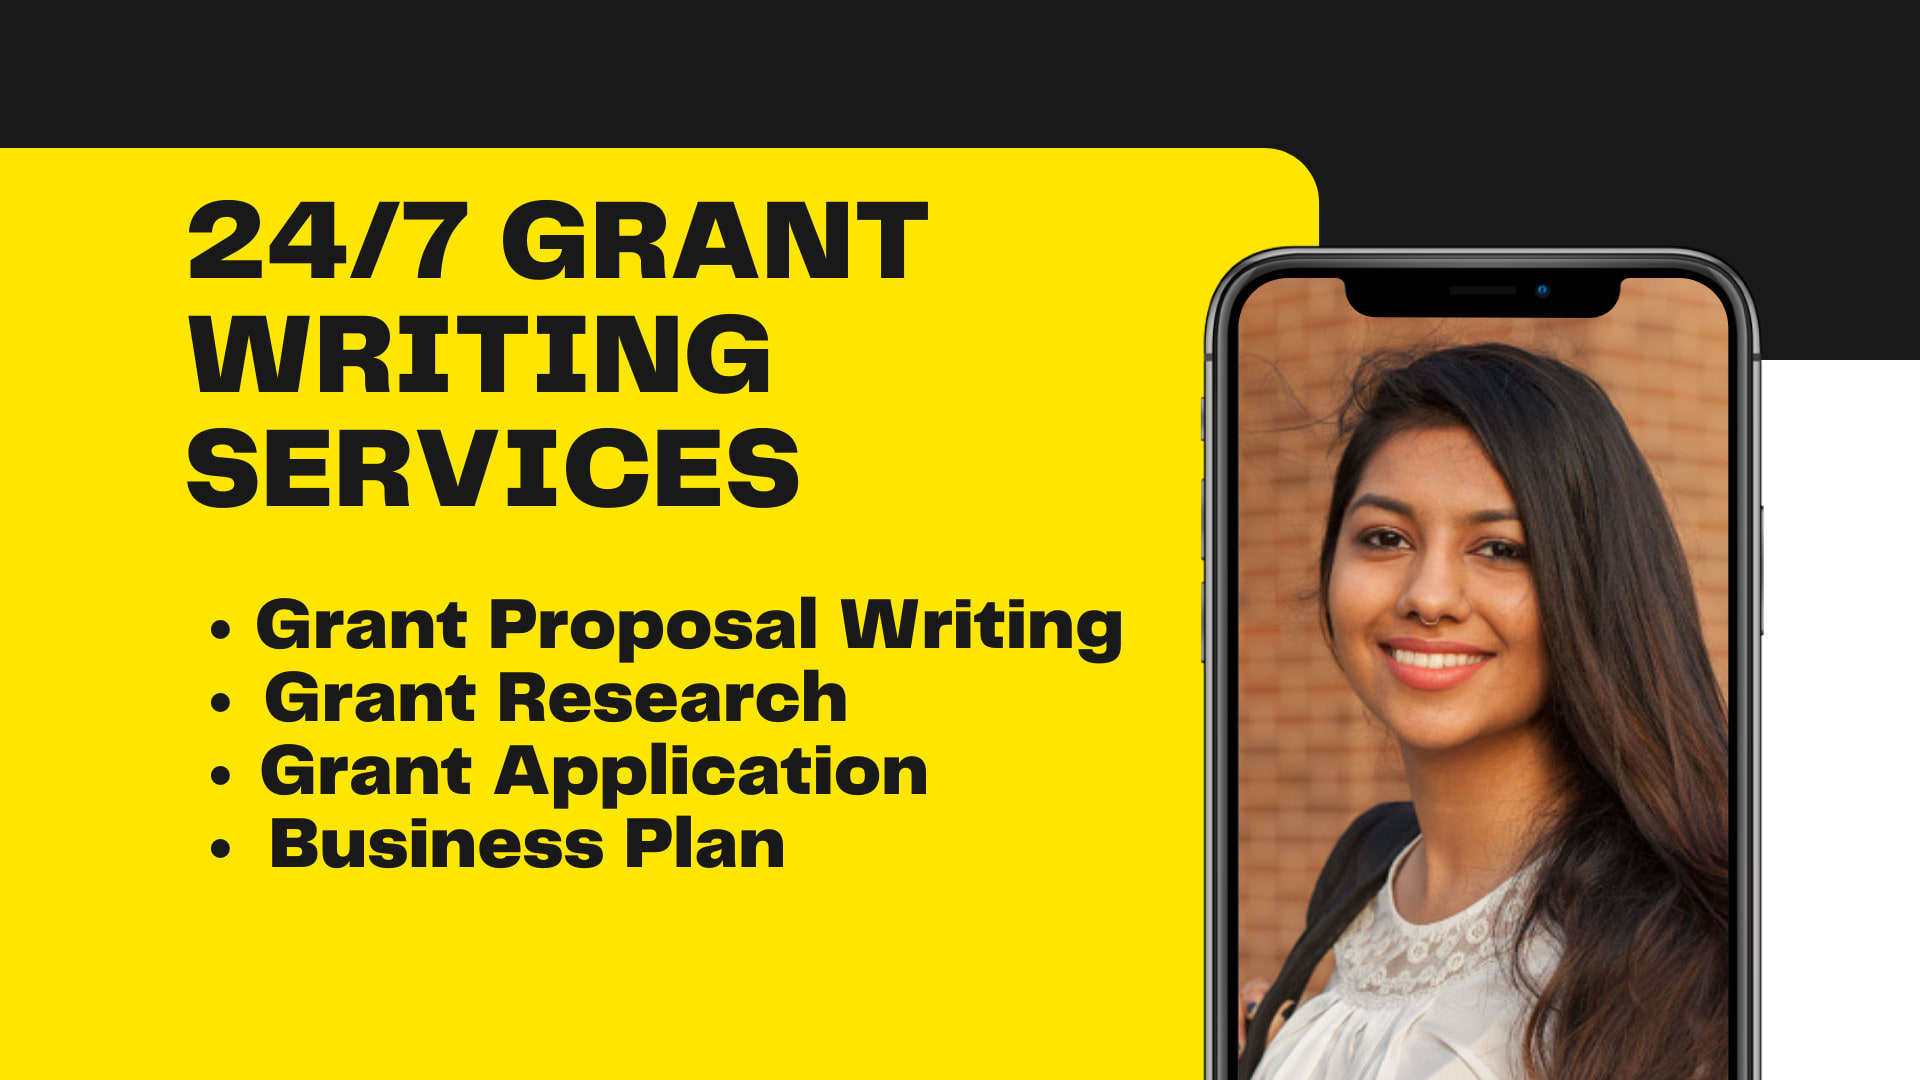 Write detailed business plan or do grant proposal writing by Words